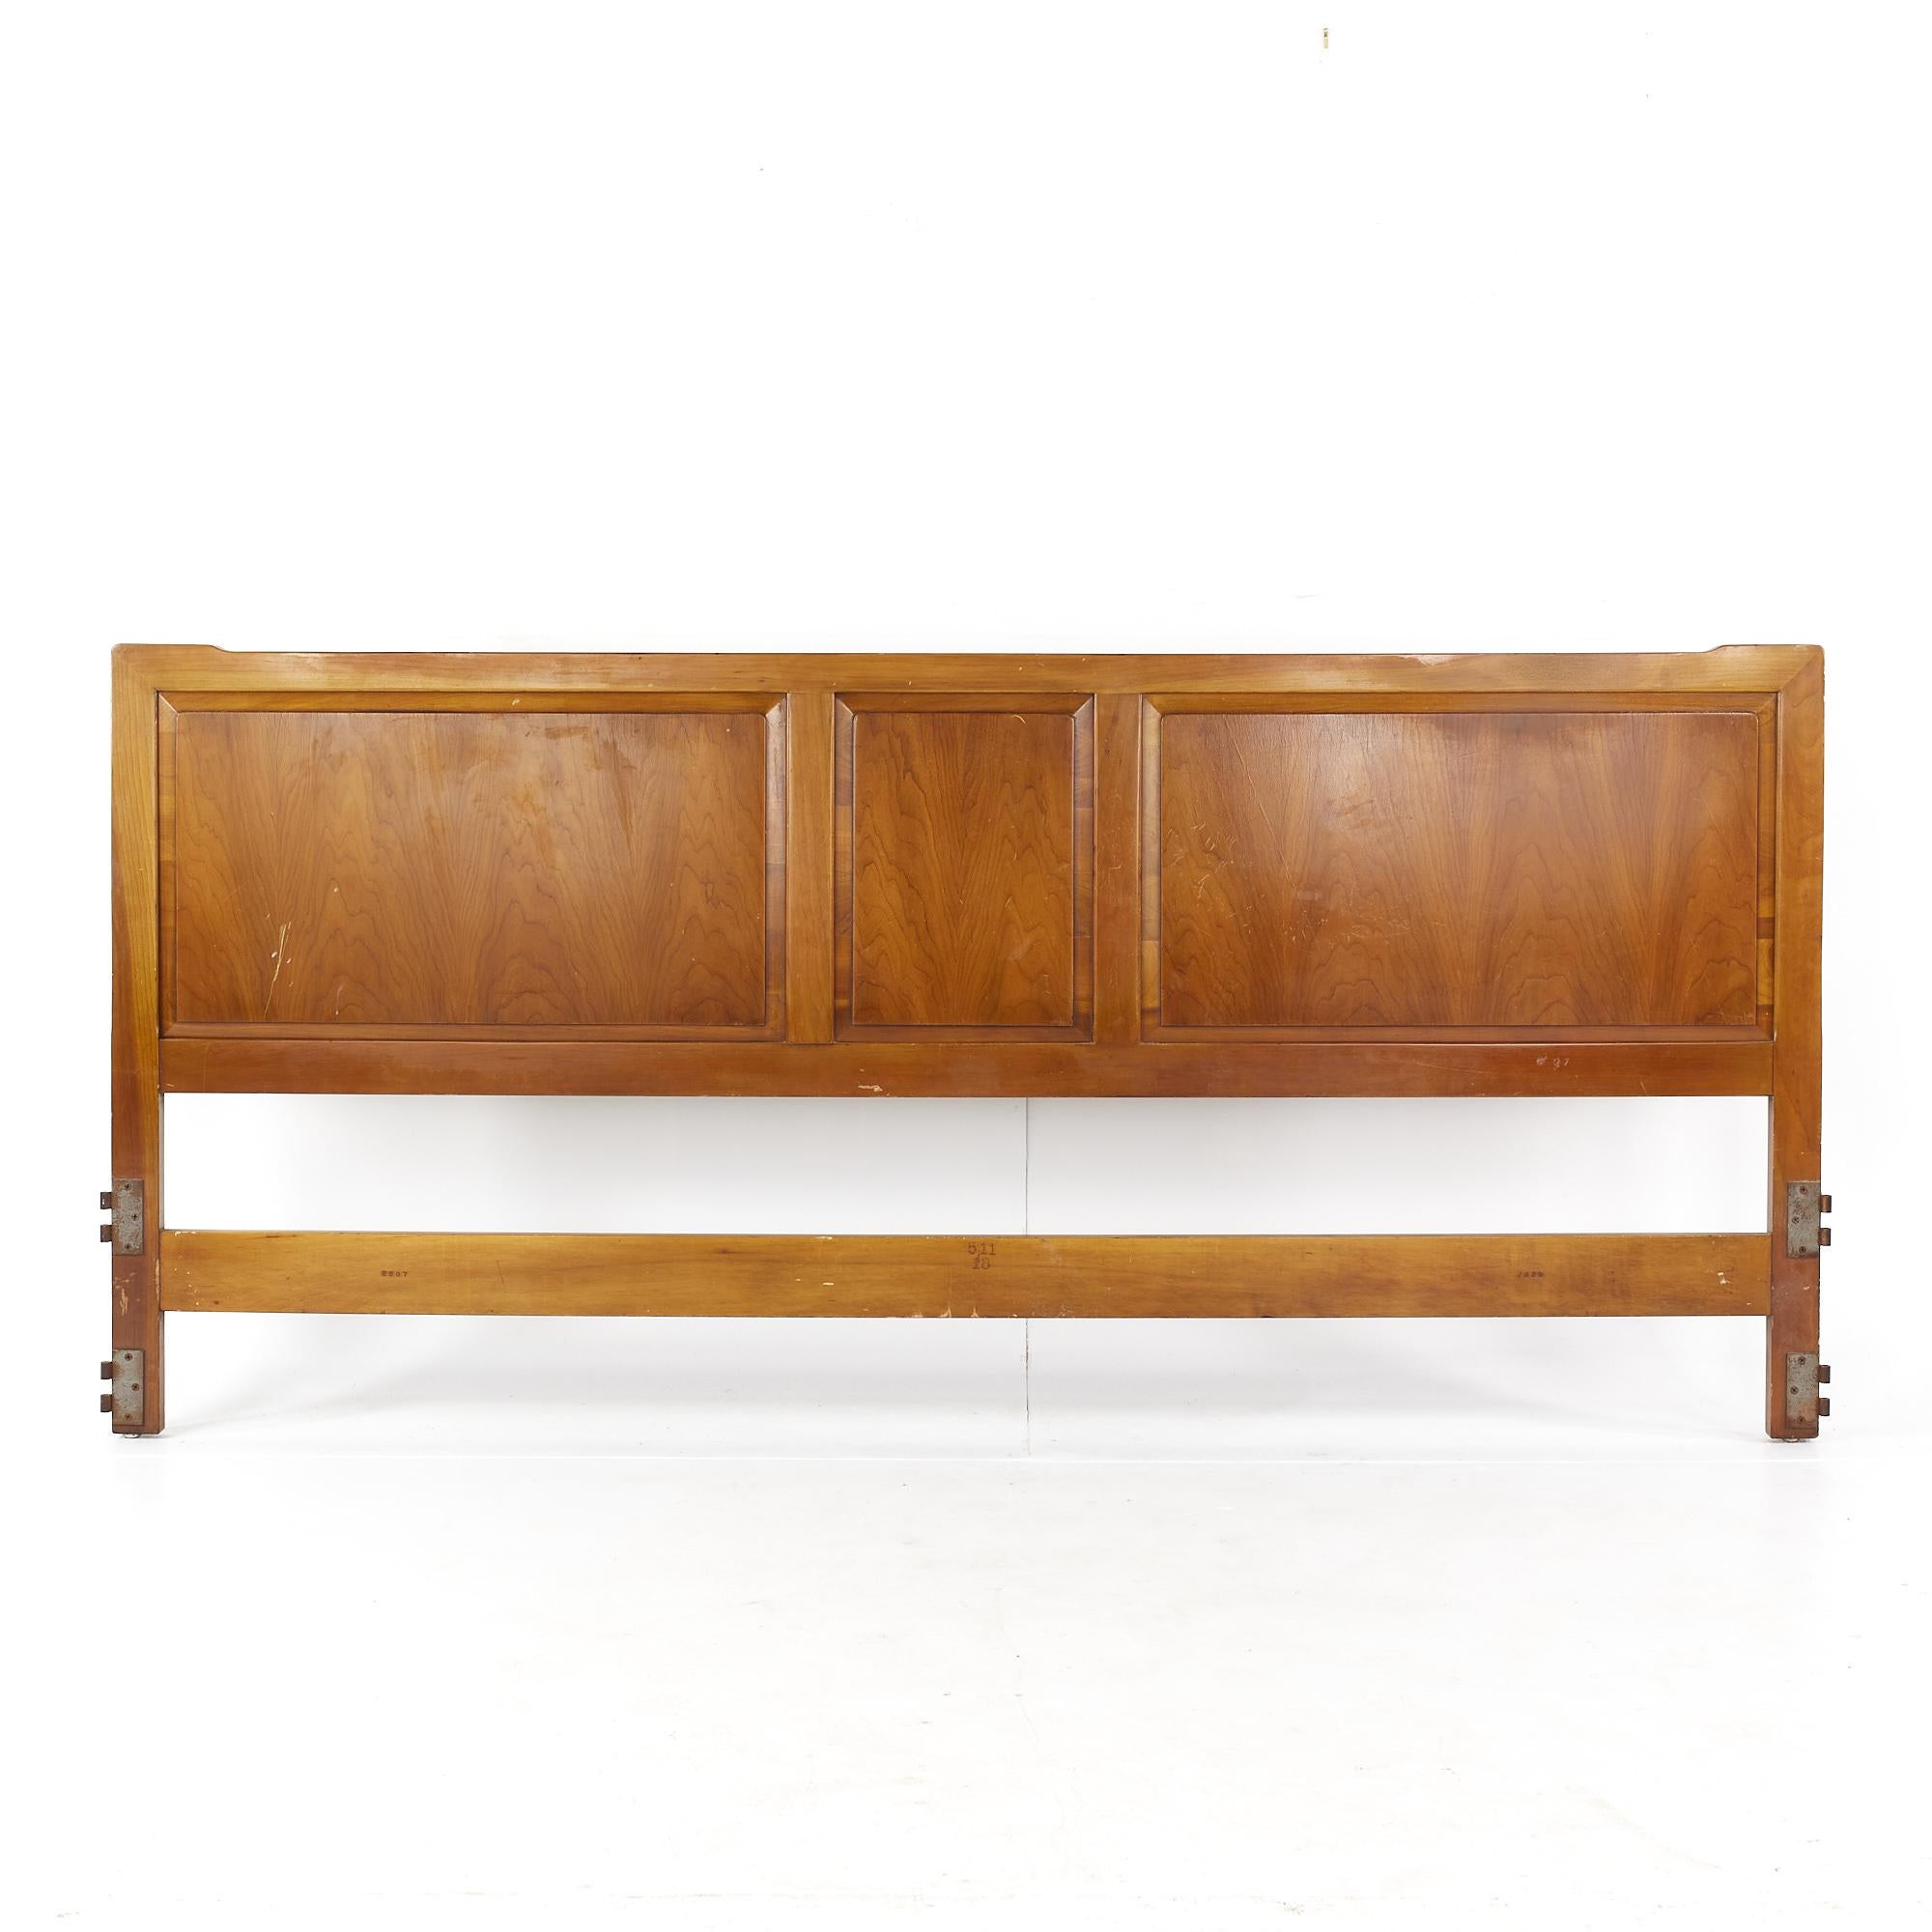 Widdicomb Mid Century King Headboard

 This headboard measures: 79.5 wide x 1.25 deep x 37.25 inches high

All pieces of furniture can be had in what we call restored vintage condition. That means the piece is restored upon purchase so it’s free of